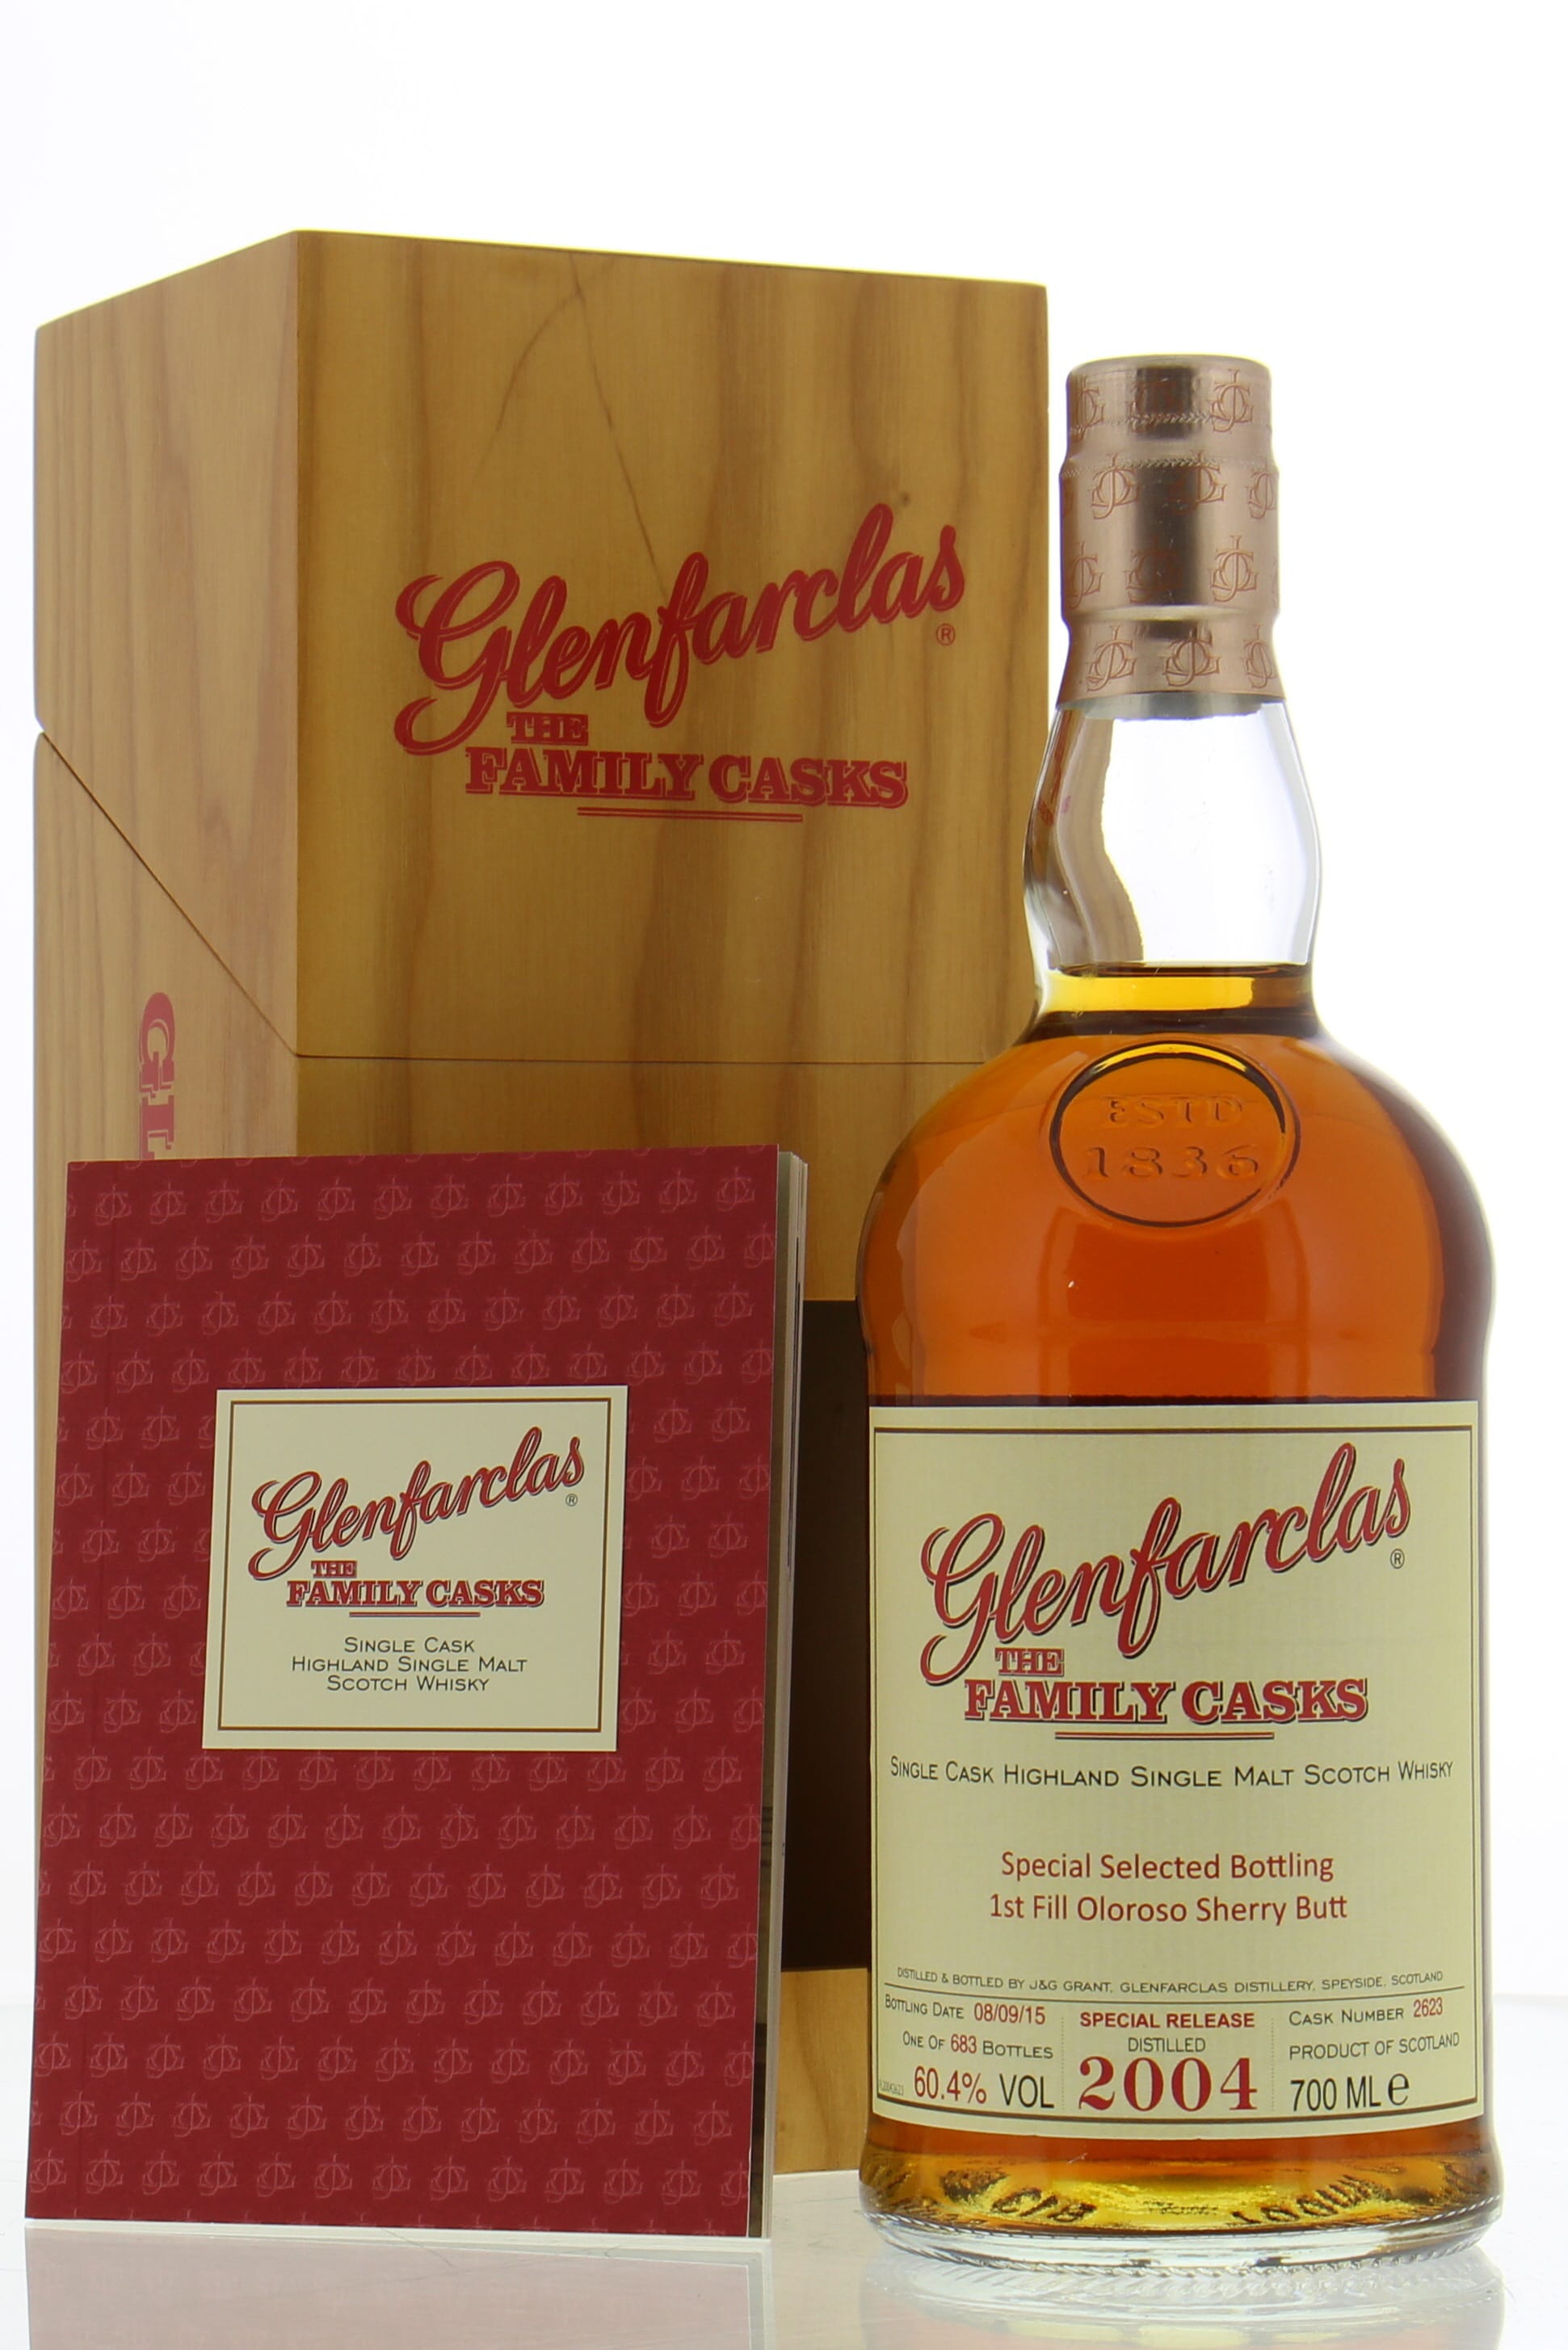 Glenfarclas - 2004 Family Cask 11 Years Old Cask:2623 Especially selected by van Wees 60.4% 2004 In Original Wooden Case